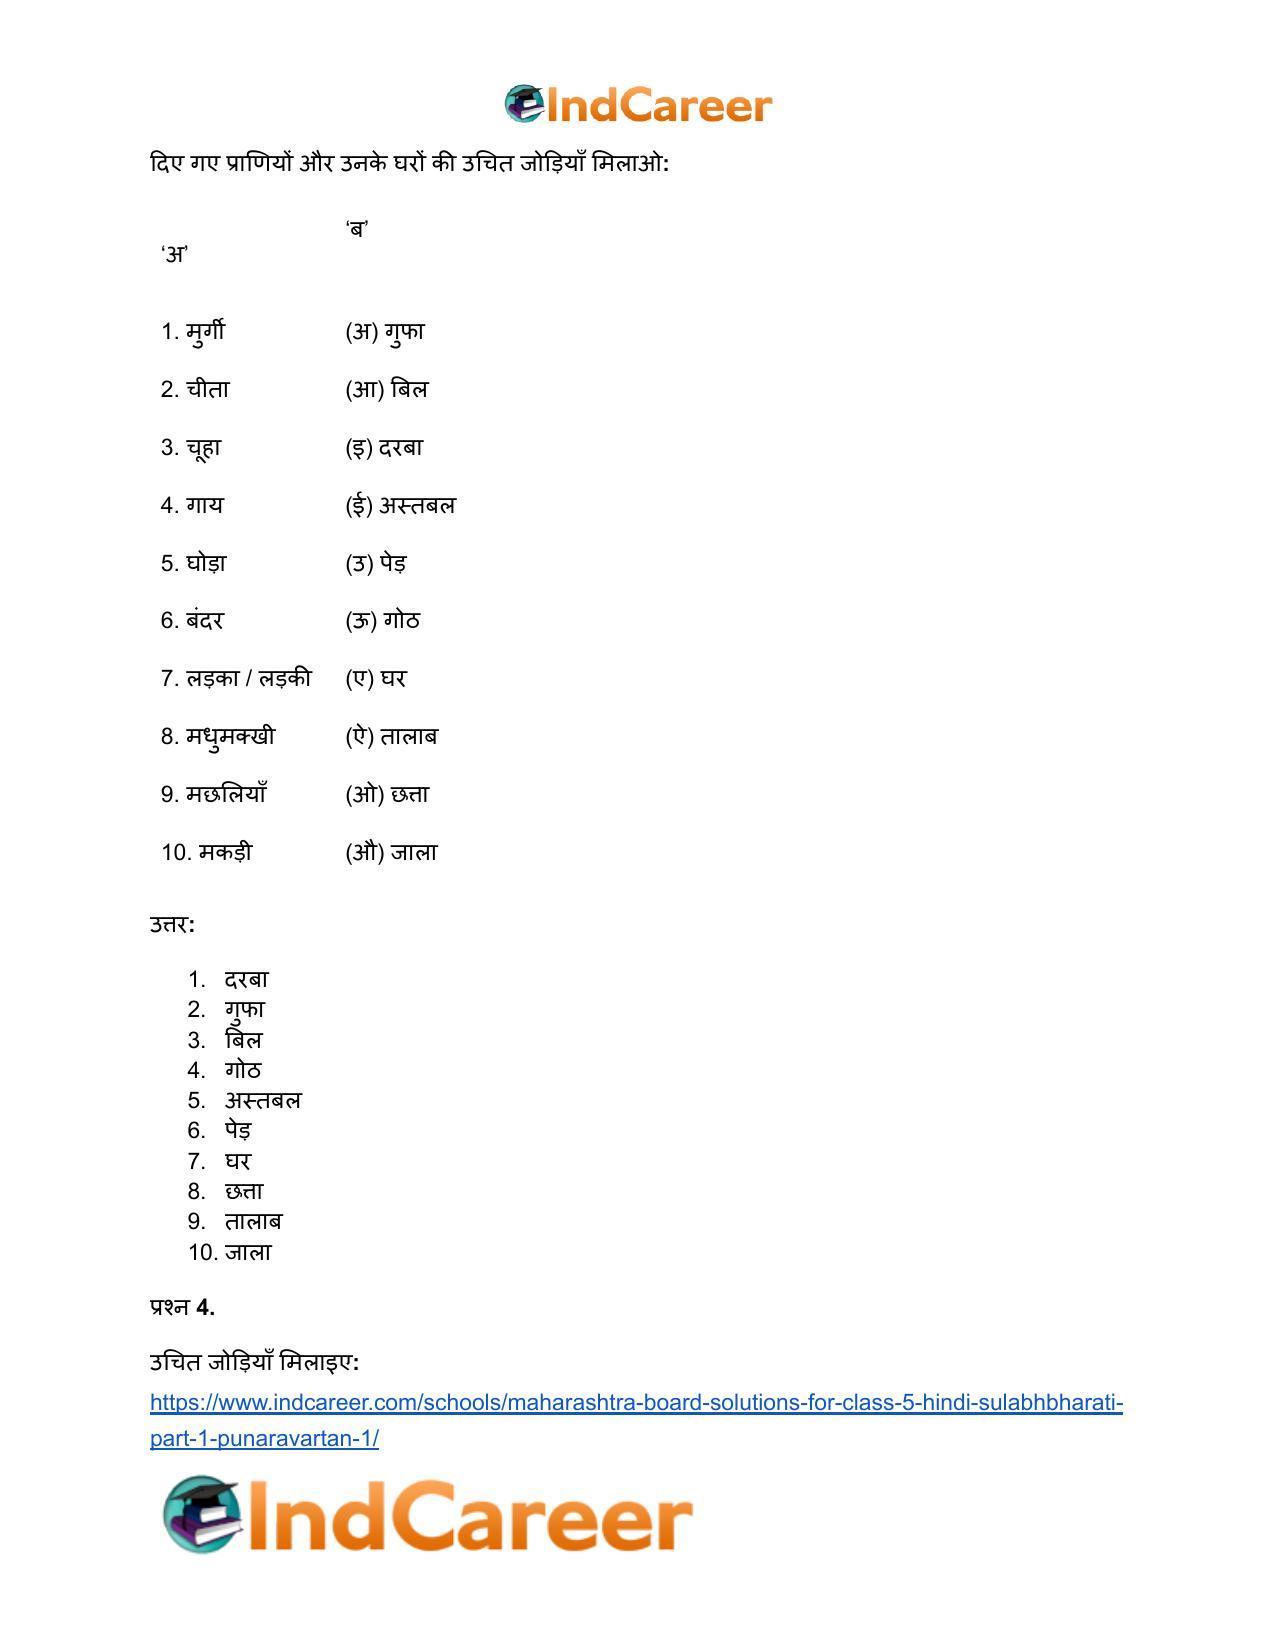 Maharashtra Board Solutions for Class 5- Hindi Sulabhbharati (Part 1): पुनरावर्तन १ - Page 5